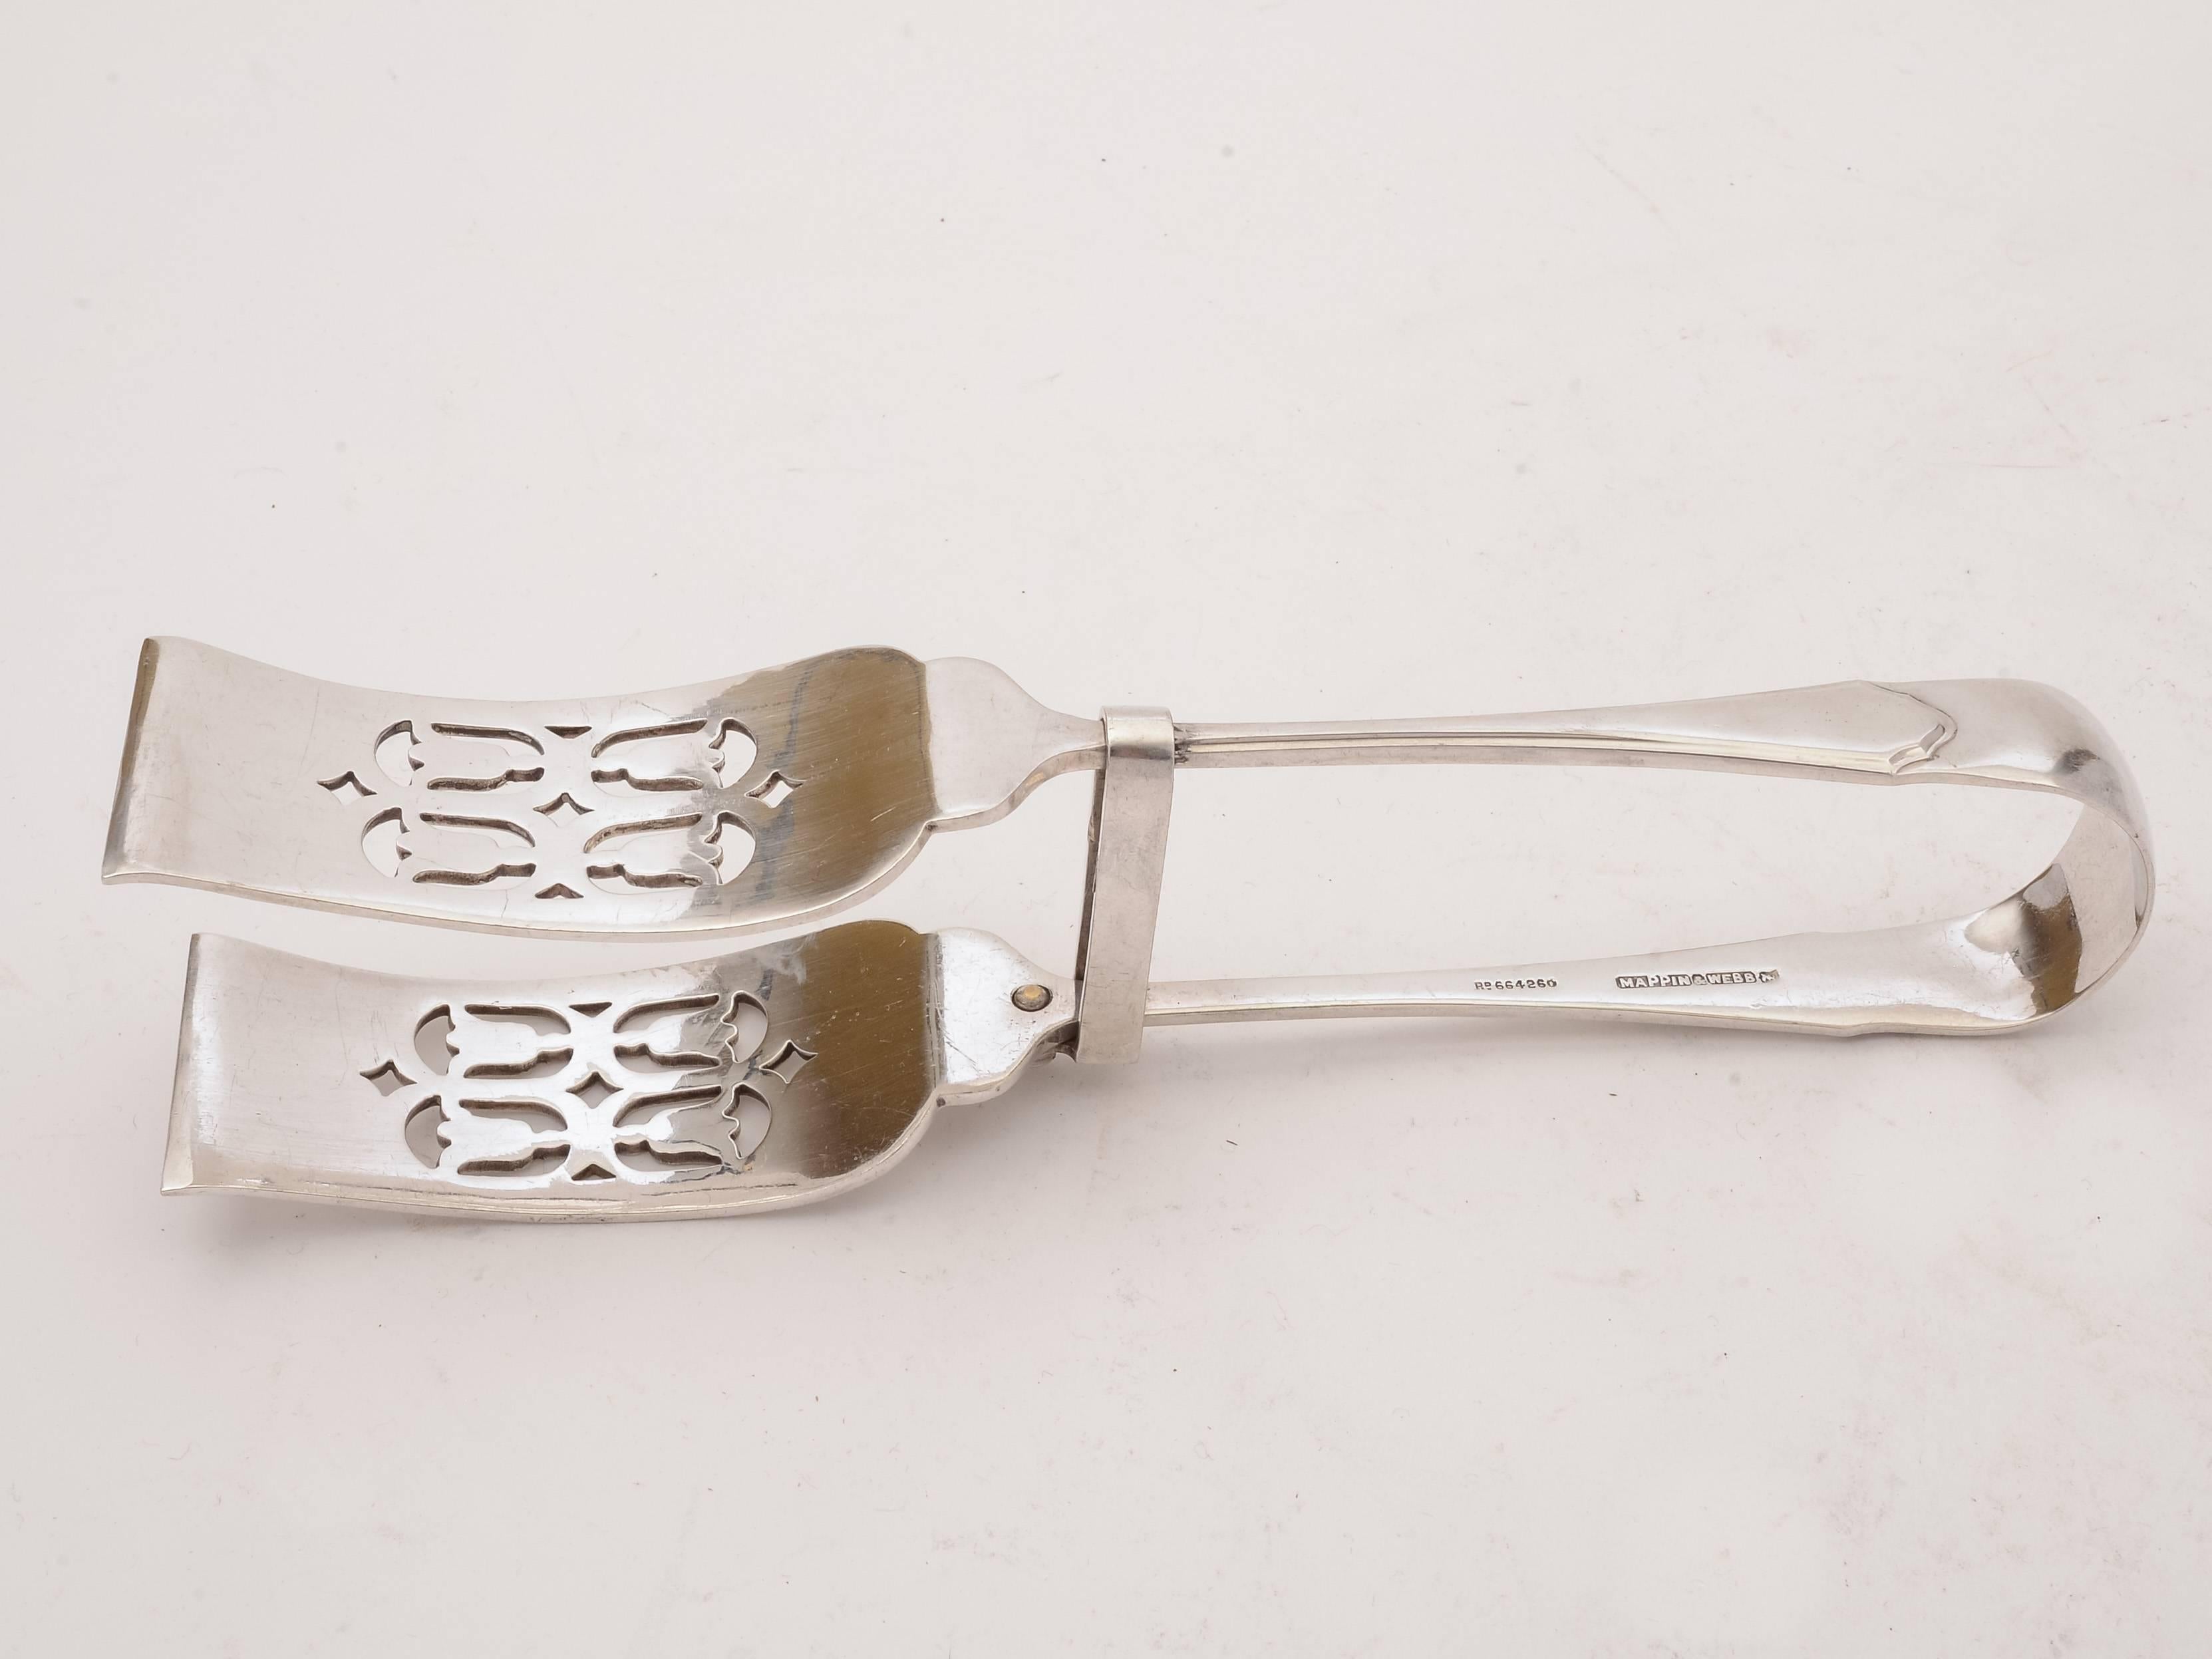 Edwardian Silver Plated Asparagus Dish with Tongs, circa 1905 In Good Condition For Sale In Umberleigh, Devon